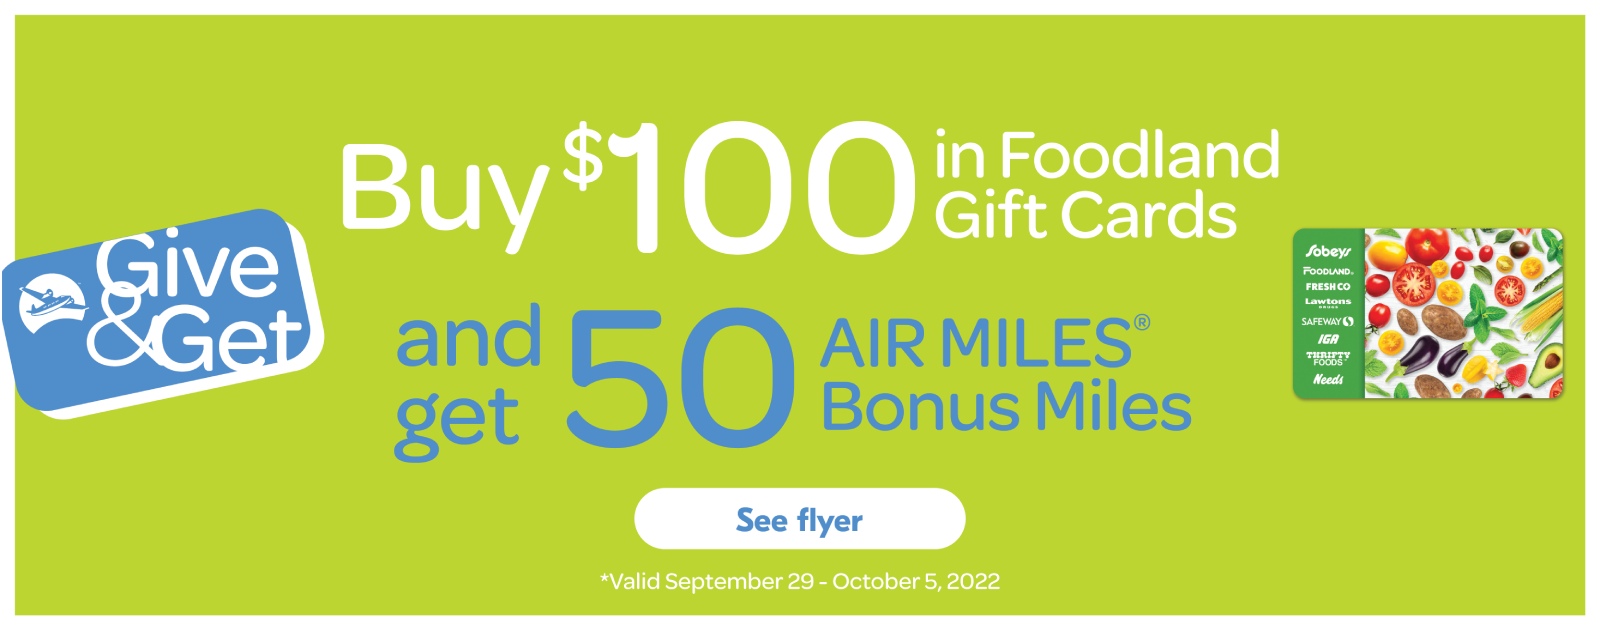 Text Reading 'Give & Get. Buy $100 in Foodland Gift Cards and get 50 Air Miles Bonus Miles. Click on 'See flyer' button at the bottom. Offer valid September 29-October 5, 2022.'